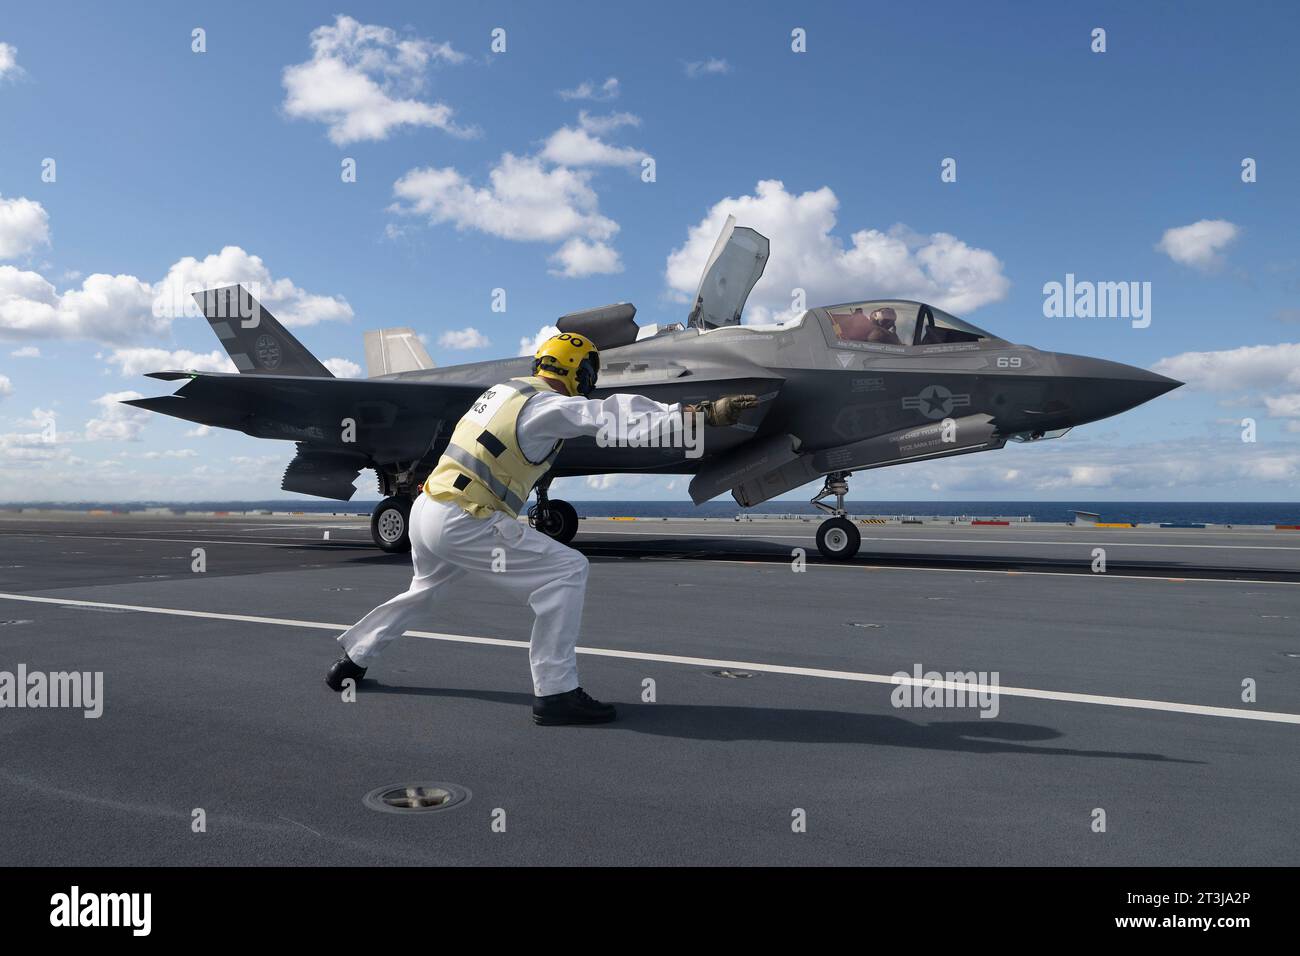 Patuxent River, United States. 24th Oct, 2023. A Royal Navy aircraft handler directs a U.S Marine Corps F-35B Lightning II stealth fighter aircraft to launch from the flight deck of the Royal Navy Queen Elizabeth-class aircraft carrier HMS Prince of Wales during developmental test phase 3 flight trials, October 24, 2023 off the coast of Maryland, USA. Credit: Michael Jackson/U.S. Navy Photo/Alamy Live News Stock Photo